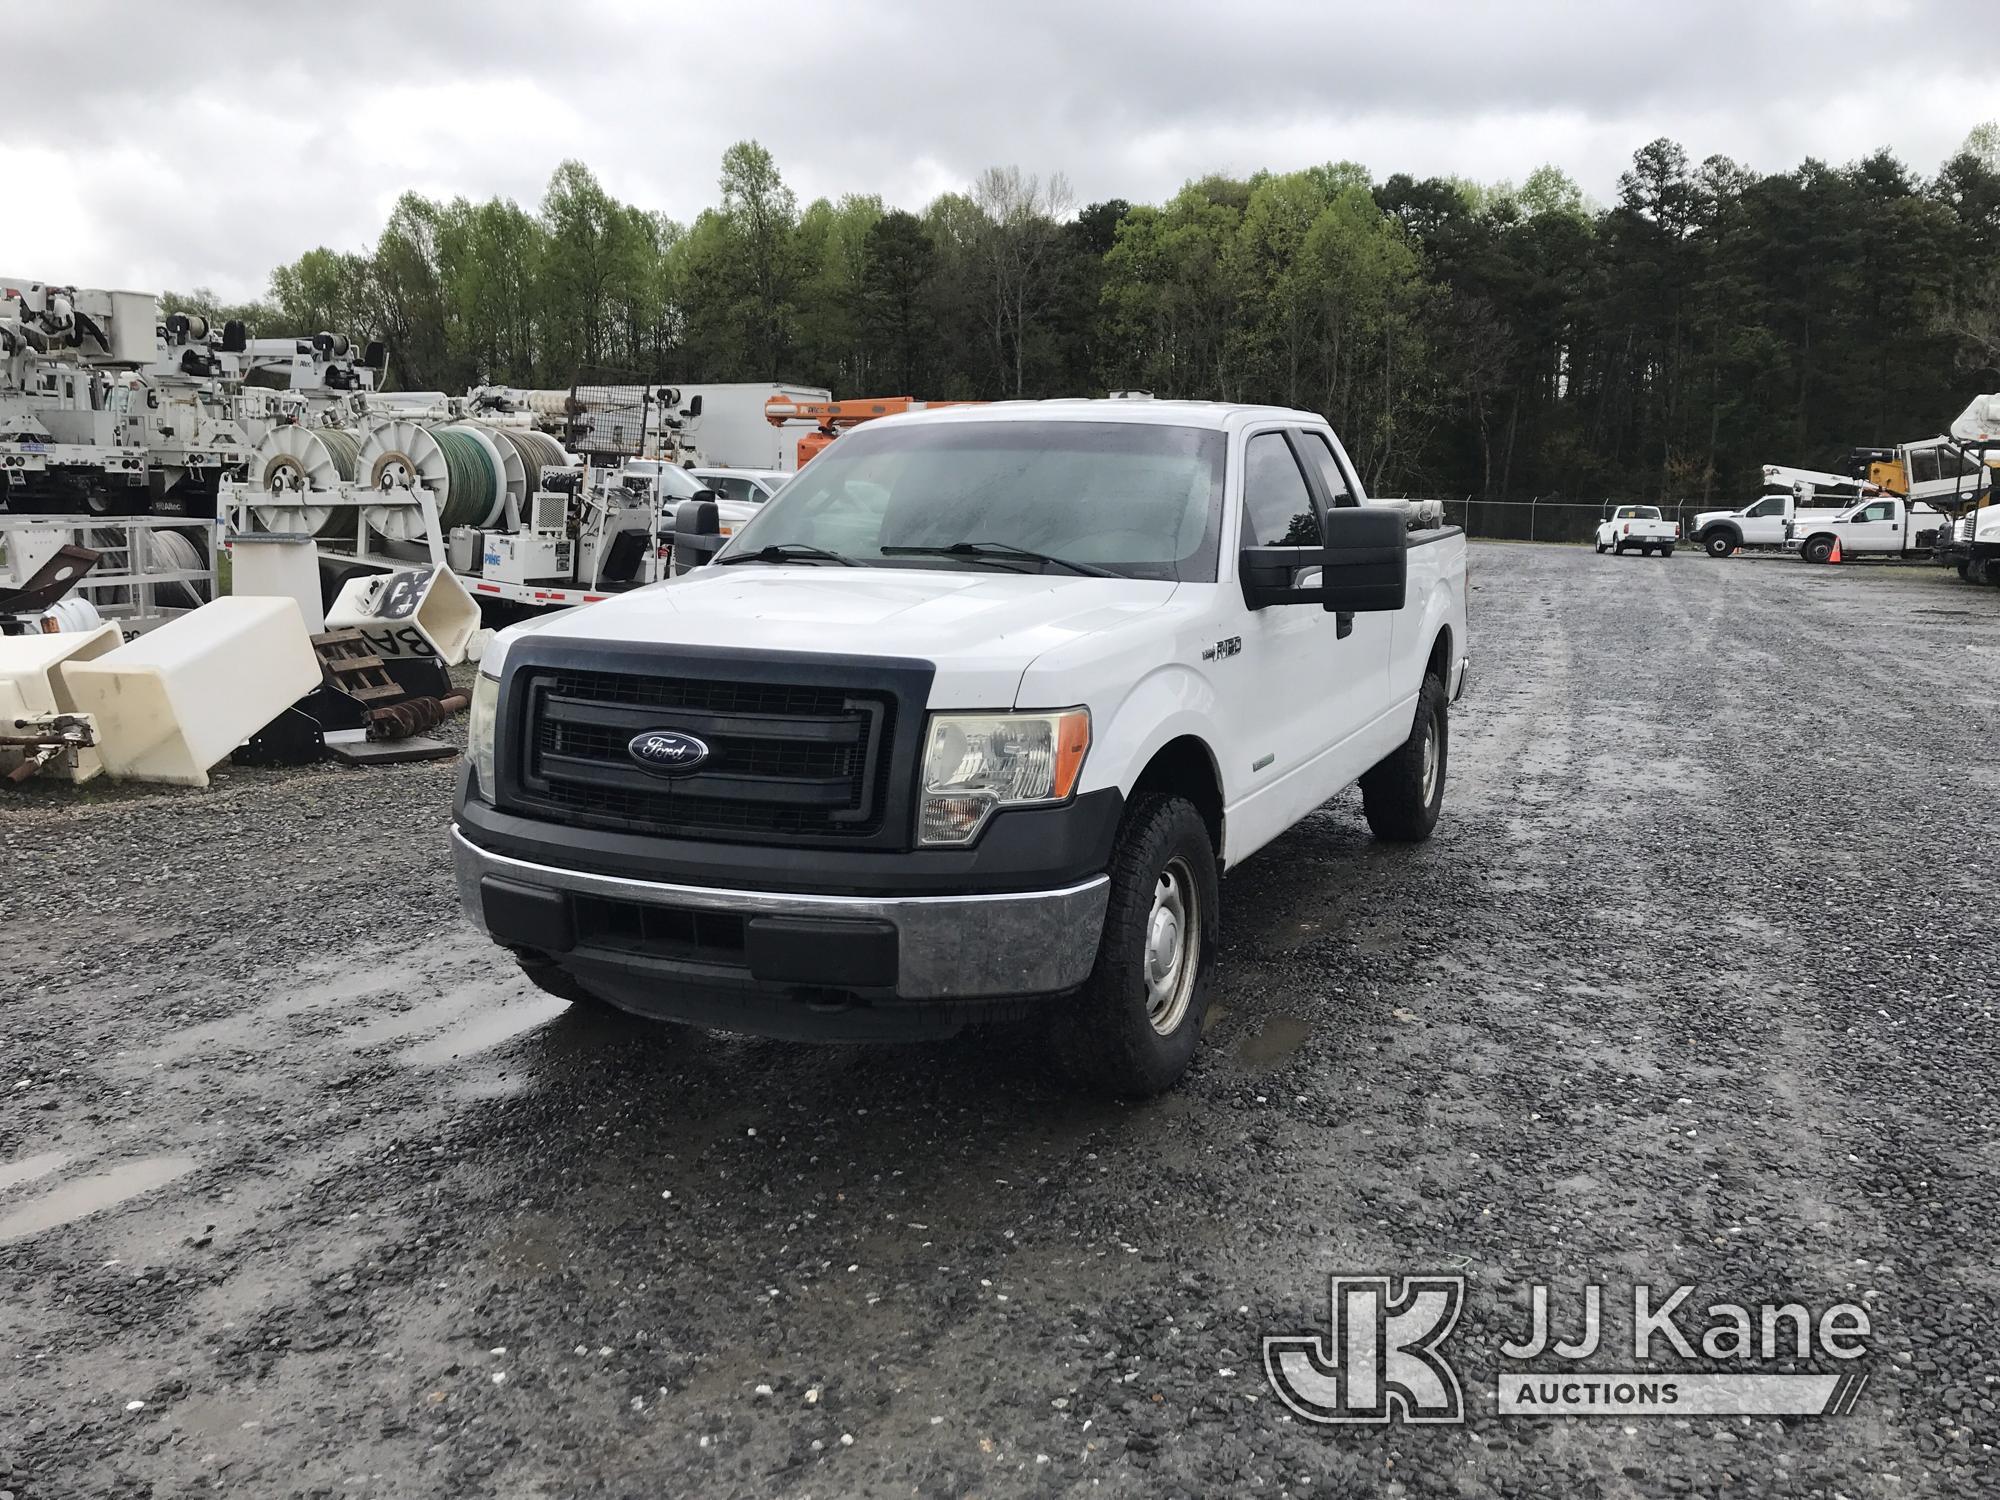 (Mount Airy, NC) 2014 Ford F150 Extended-Cab Pickup Truck Runs & Moves